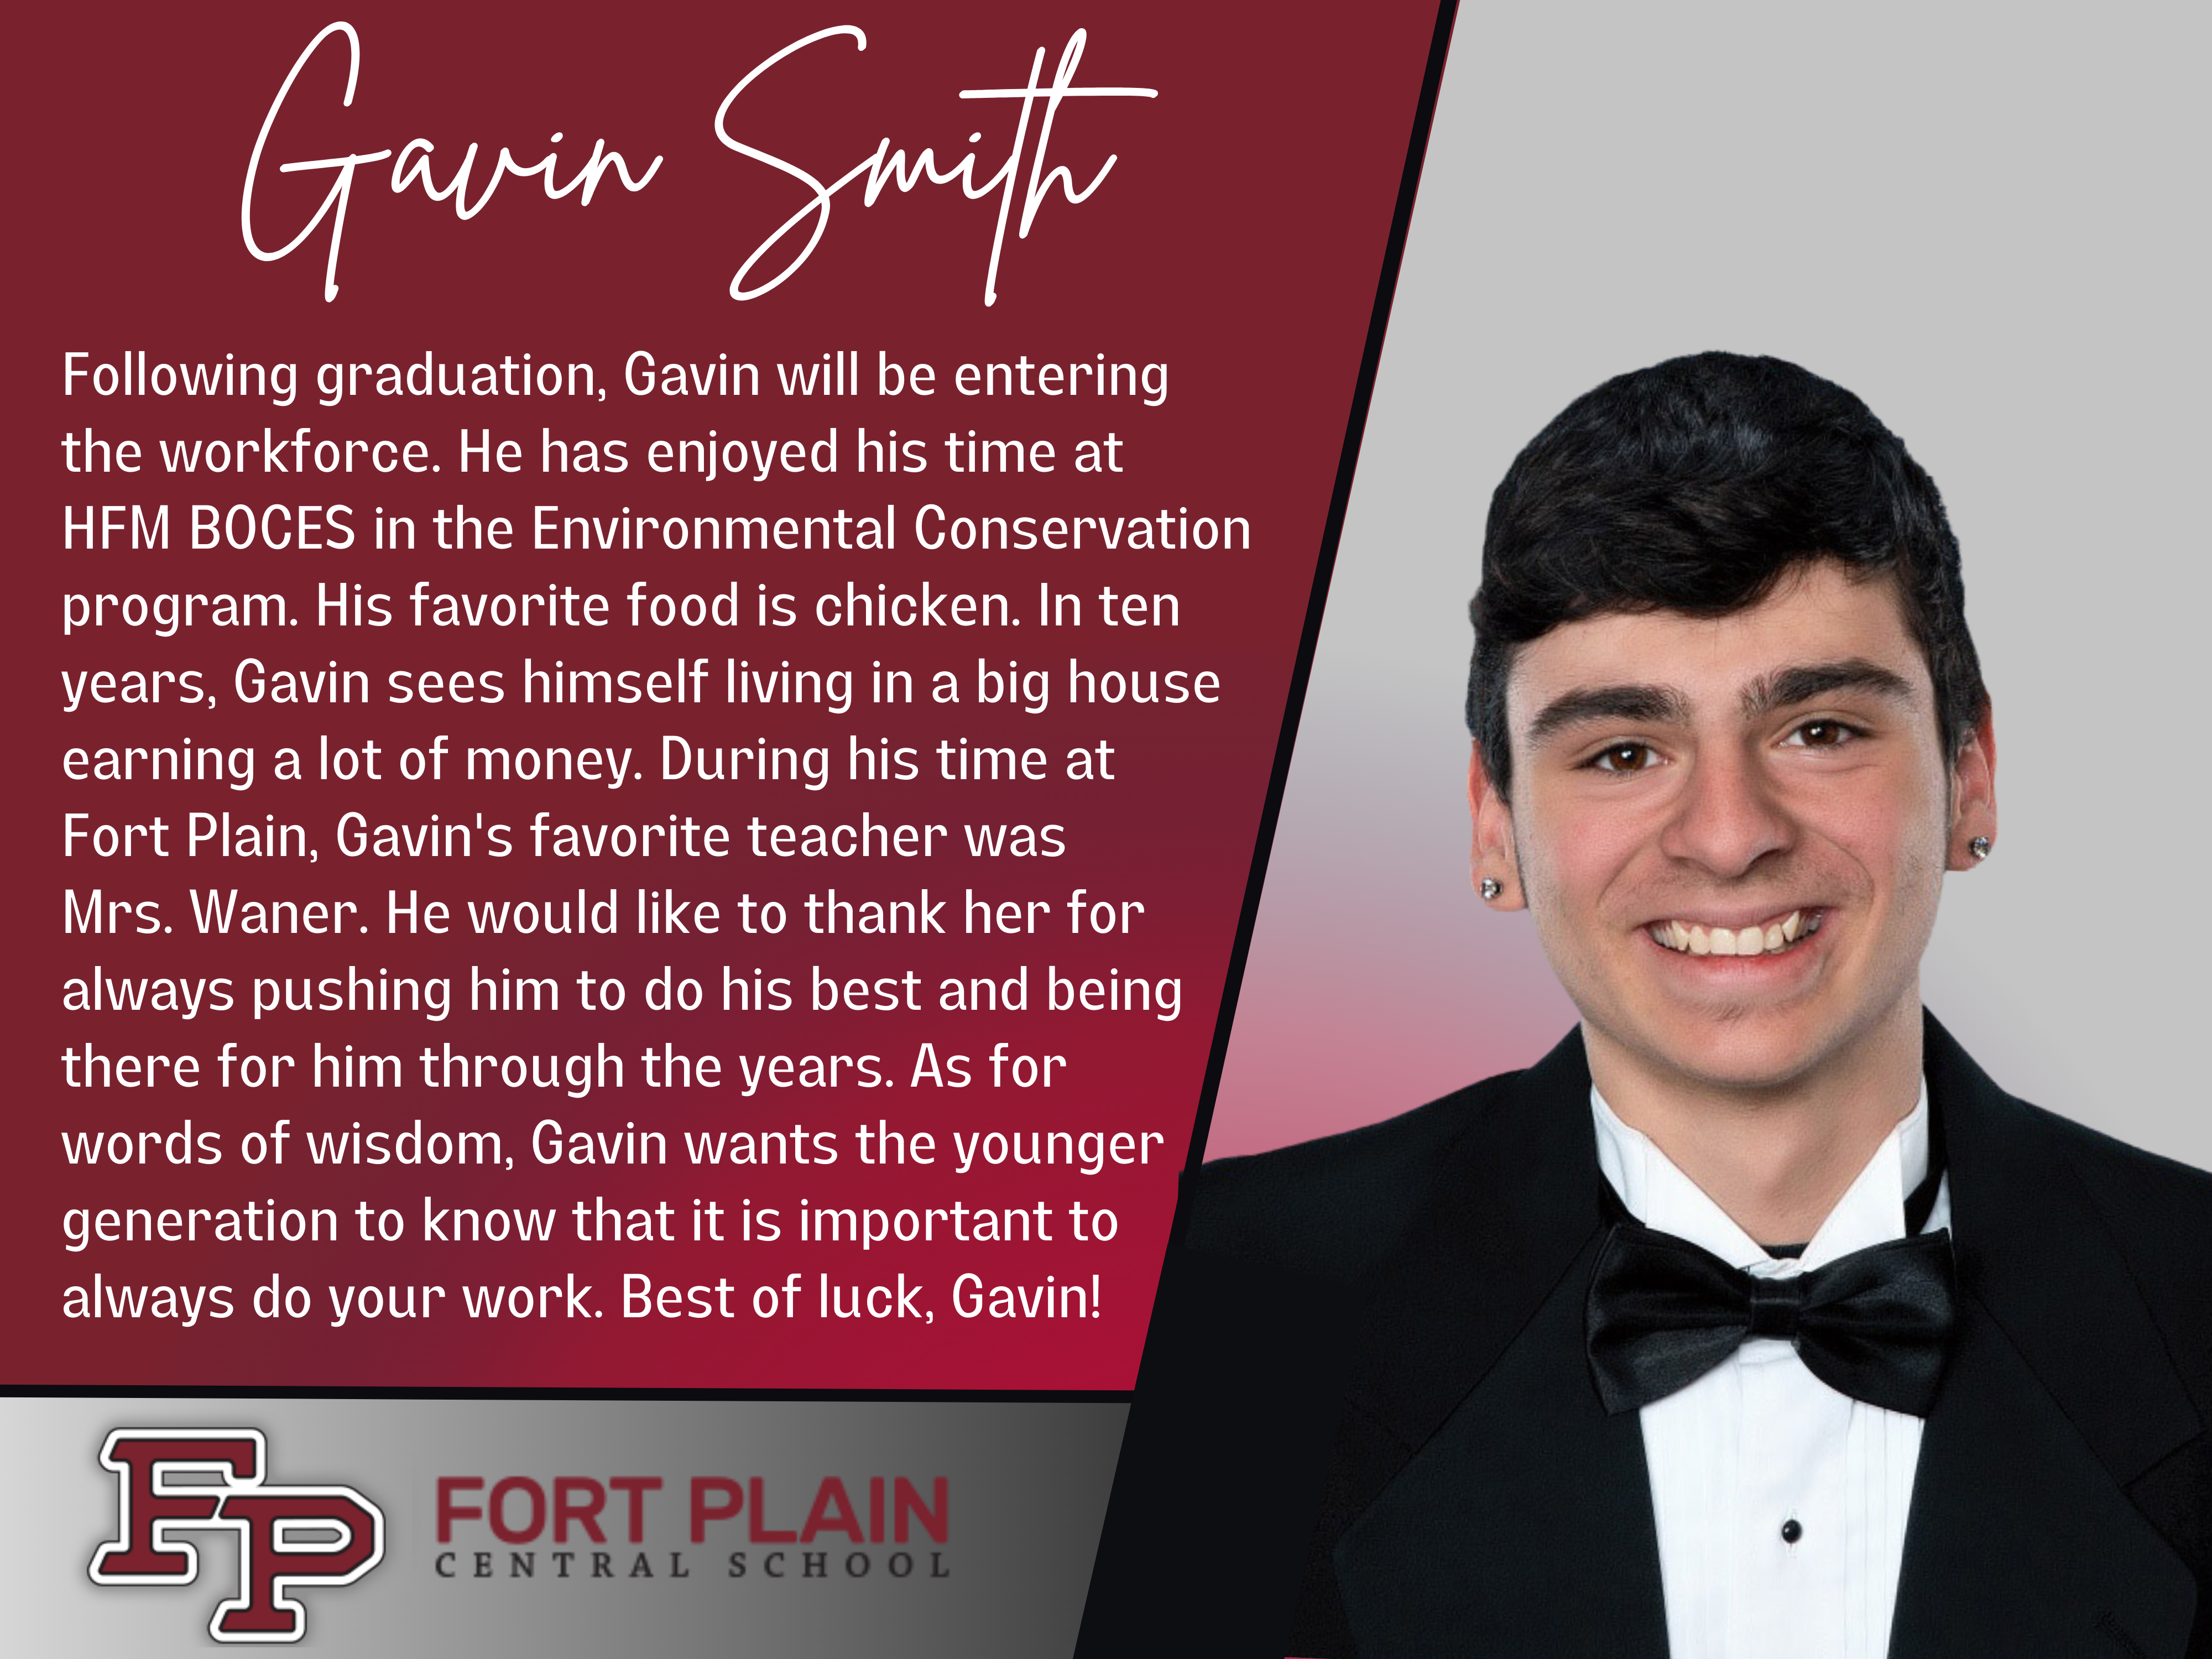 photo of and info about Gavin